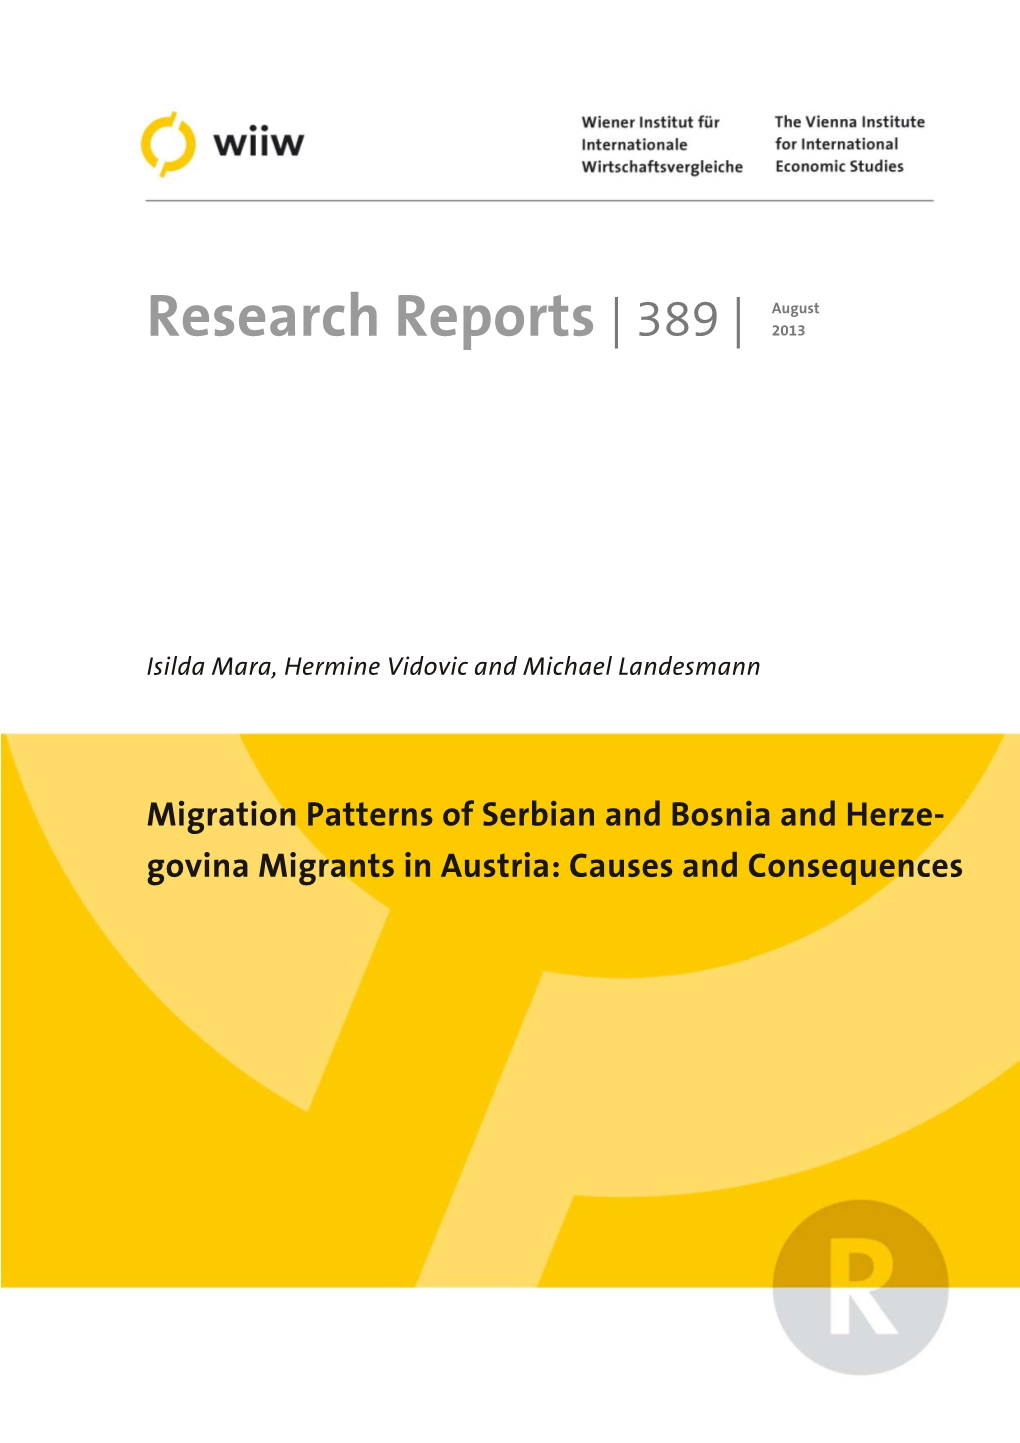 Migration Patterns of Serbian and Bosnia and Herzegovina Migrants in Austria: Causes and Consequences